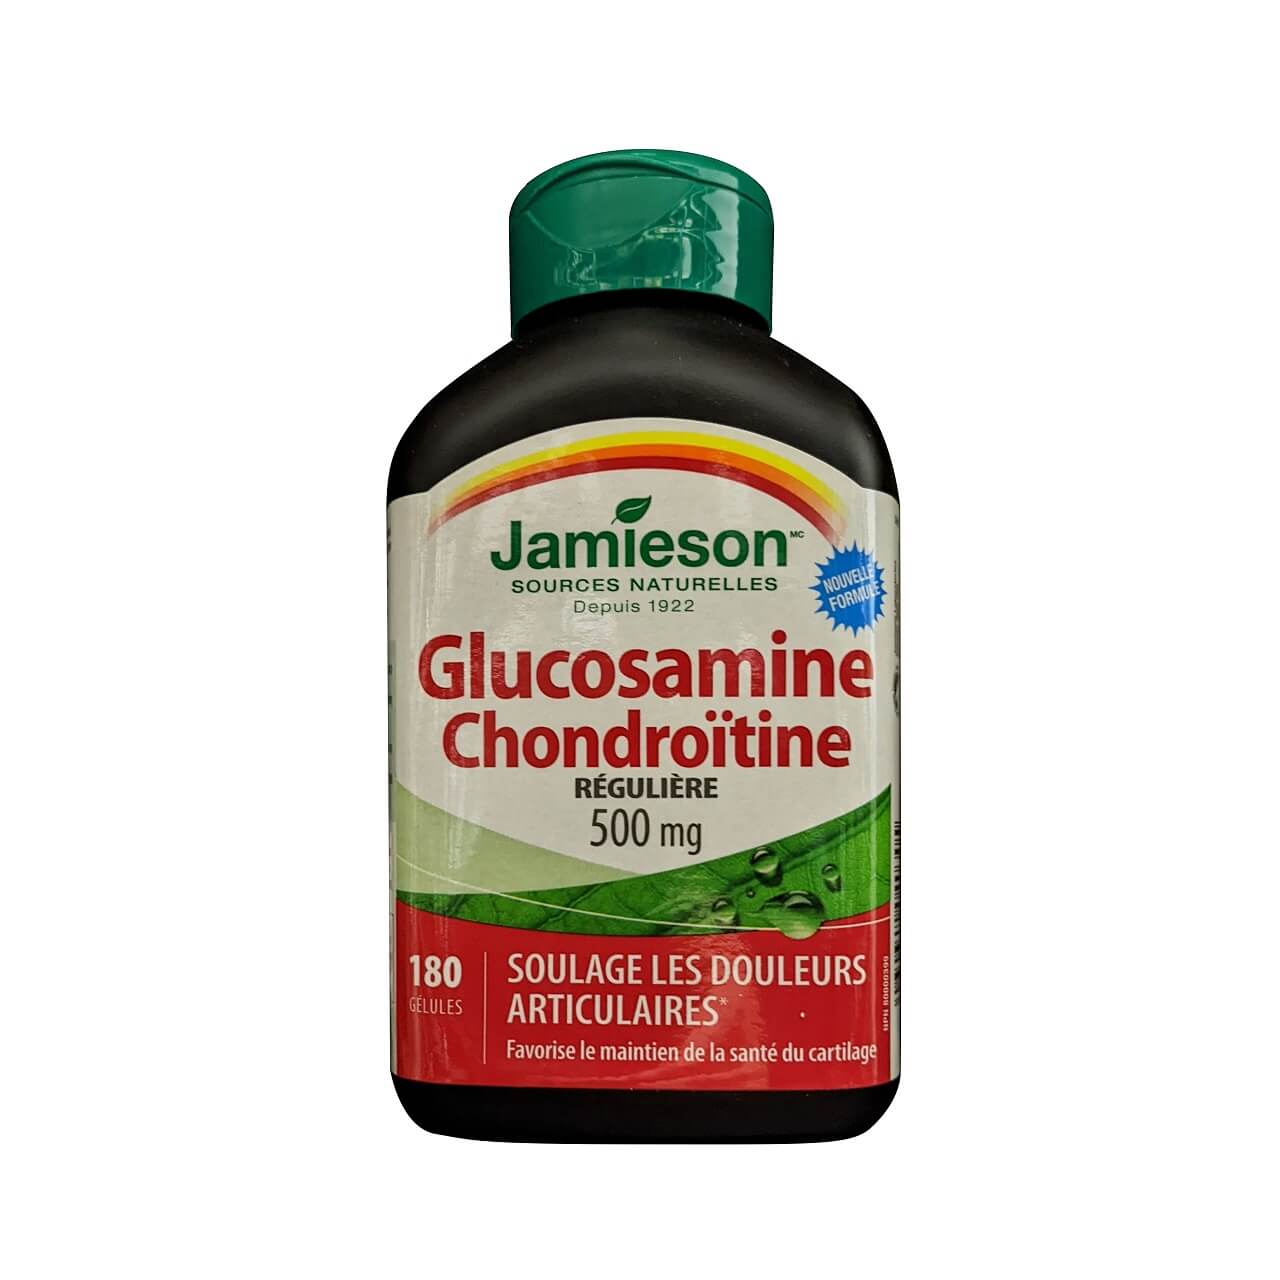 Product label for Jamieson Glucosamine Chondroitin Regular Strength 500 mg (180 softgels) in French